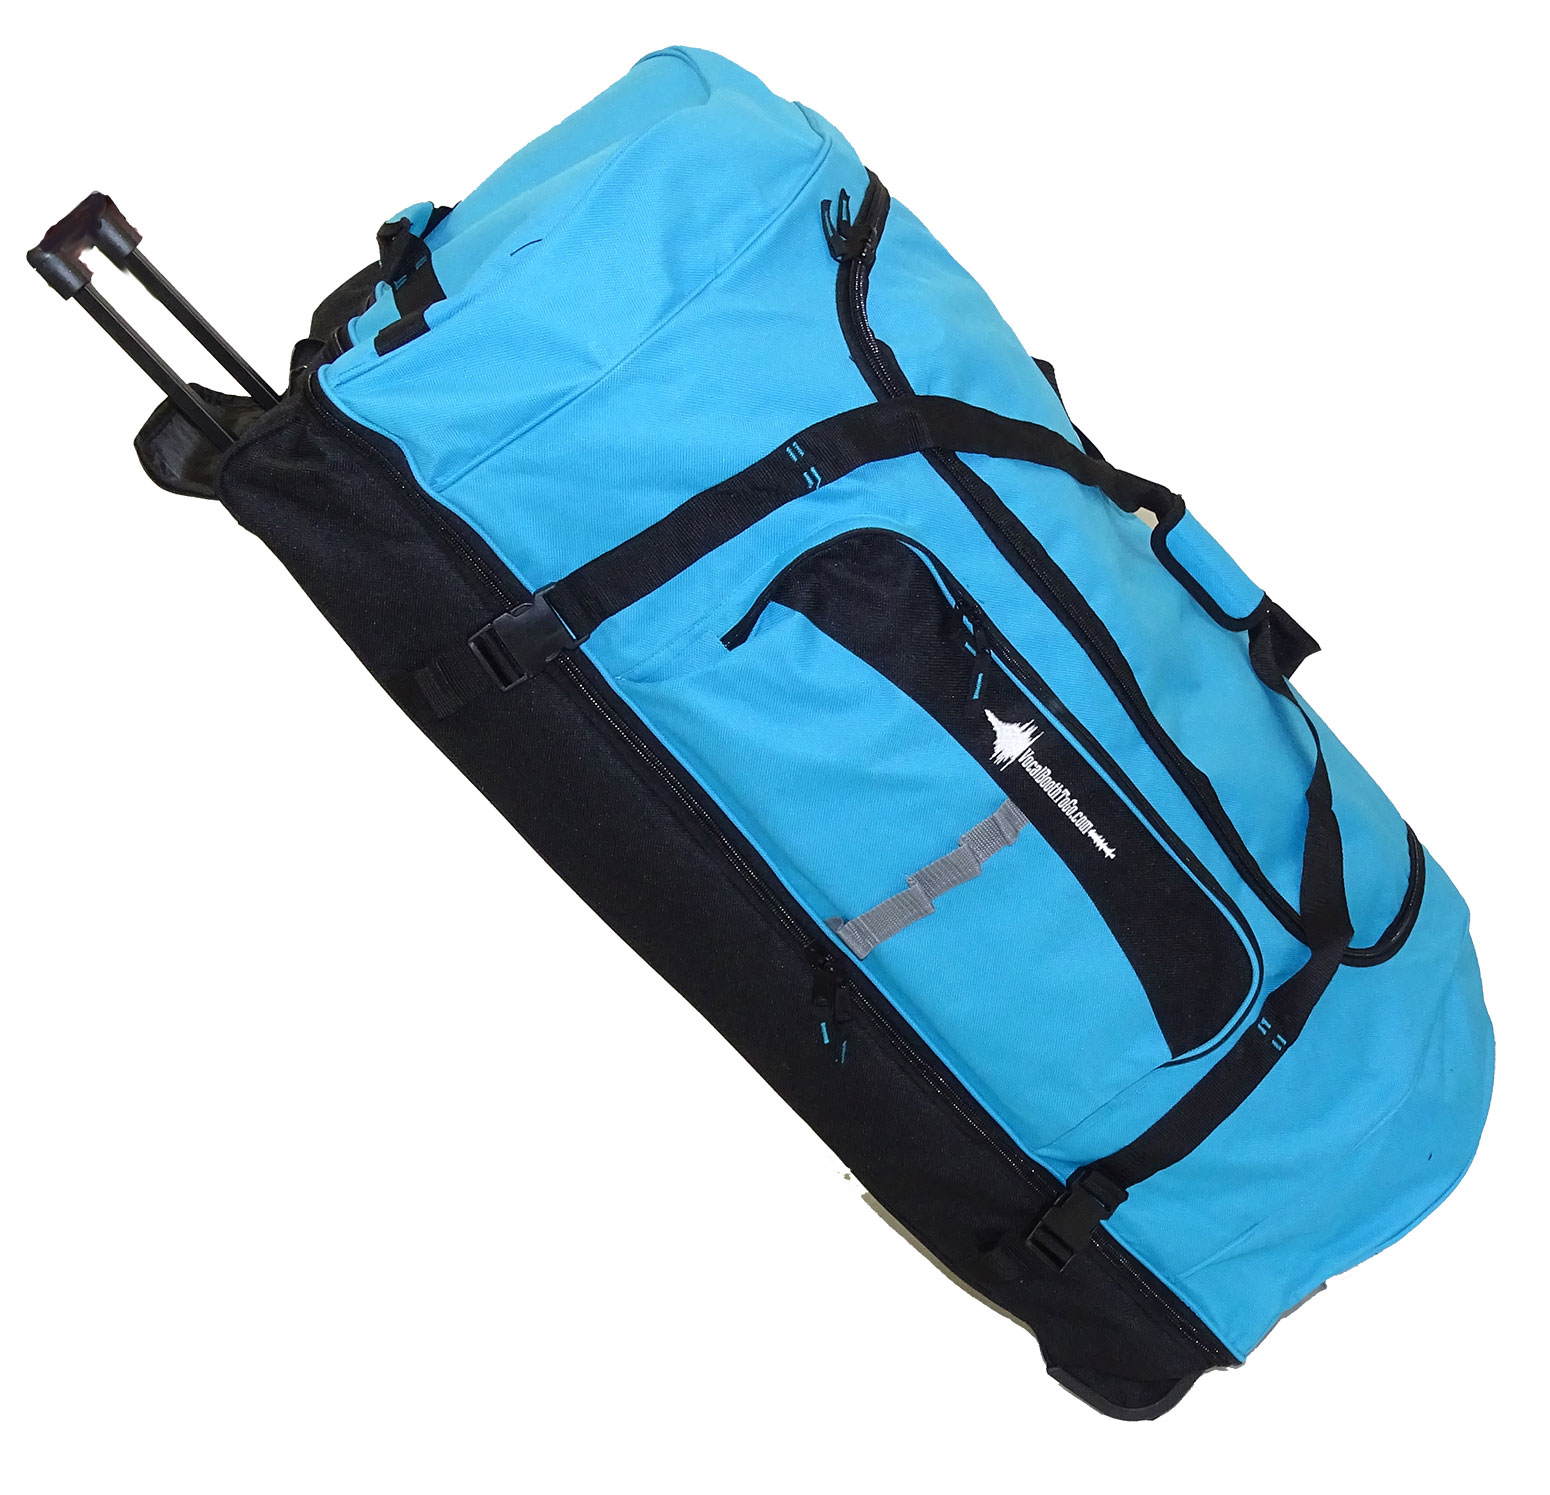 duffle bag with wheels - Home Design Ideas, Pictures & Inspiration Houzz